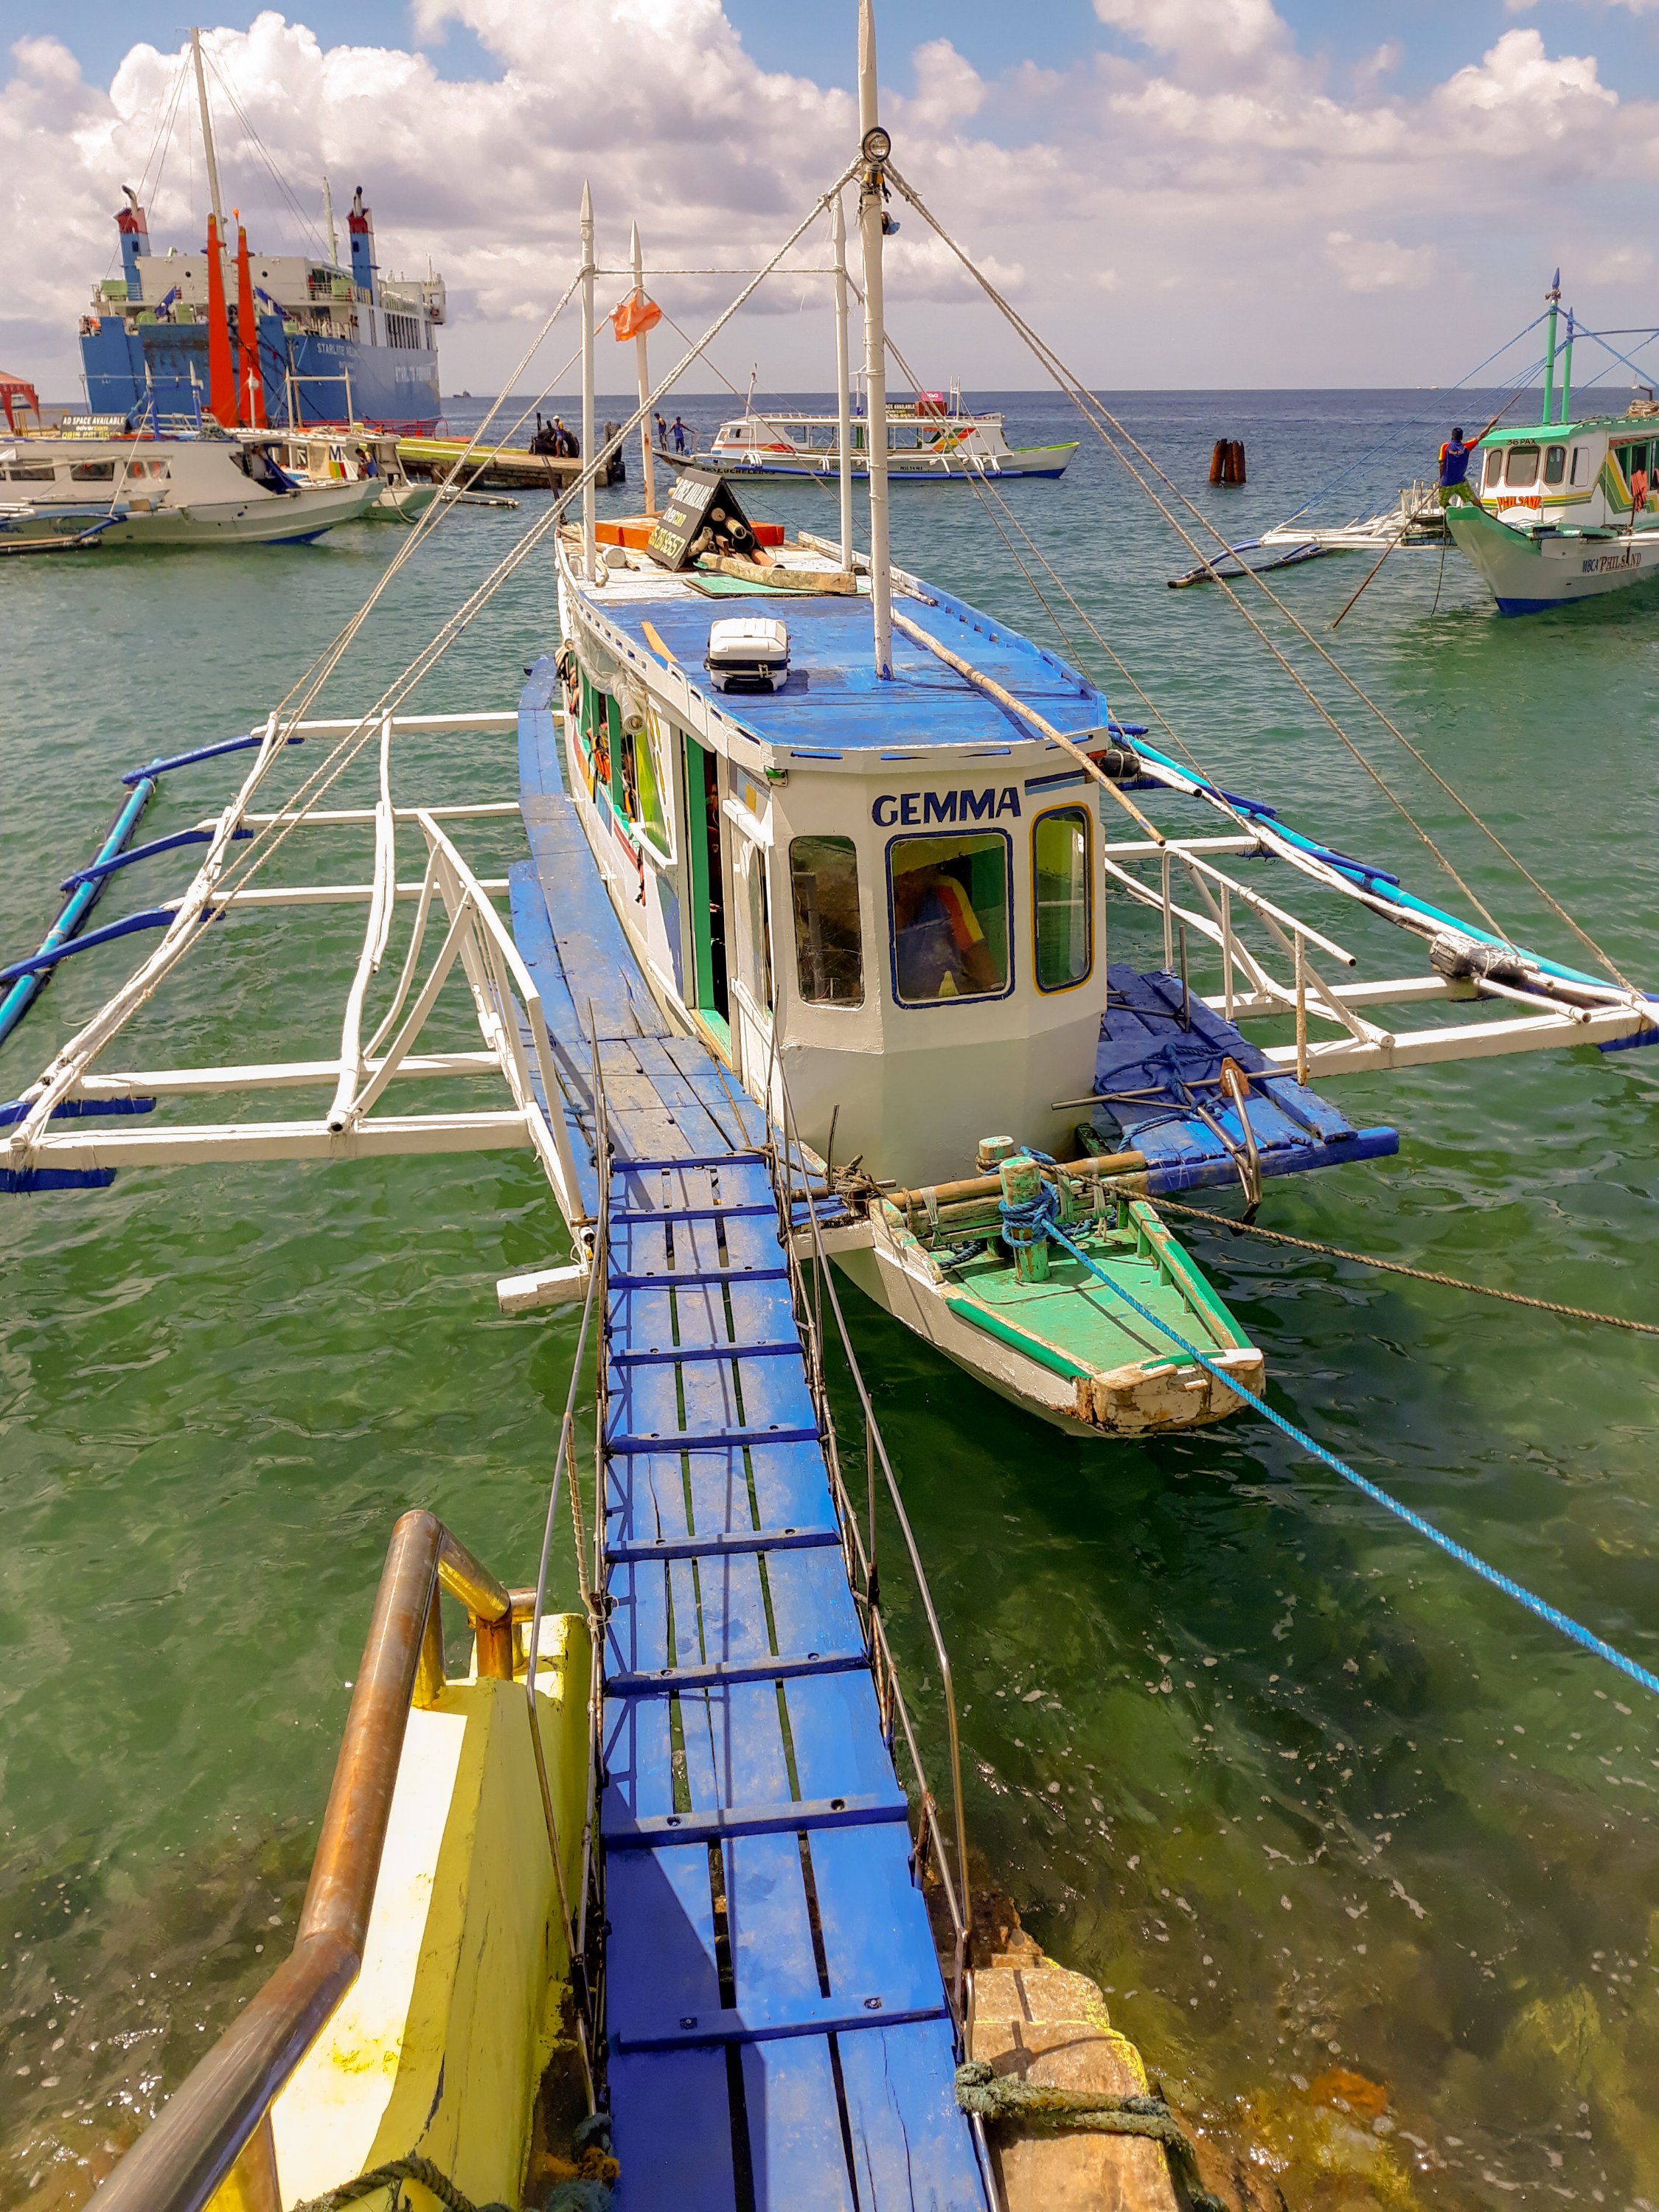 Pump boat from Caticlan Jetty Port to Cagban Port